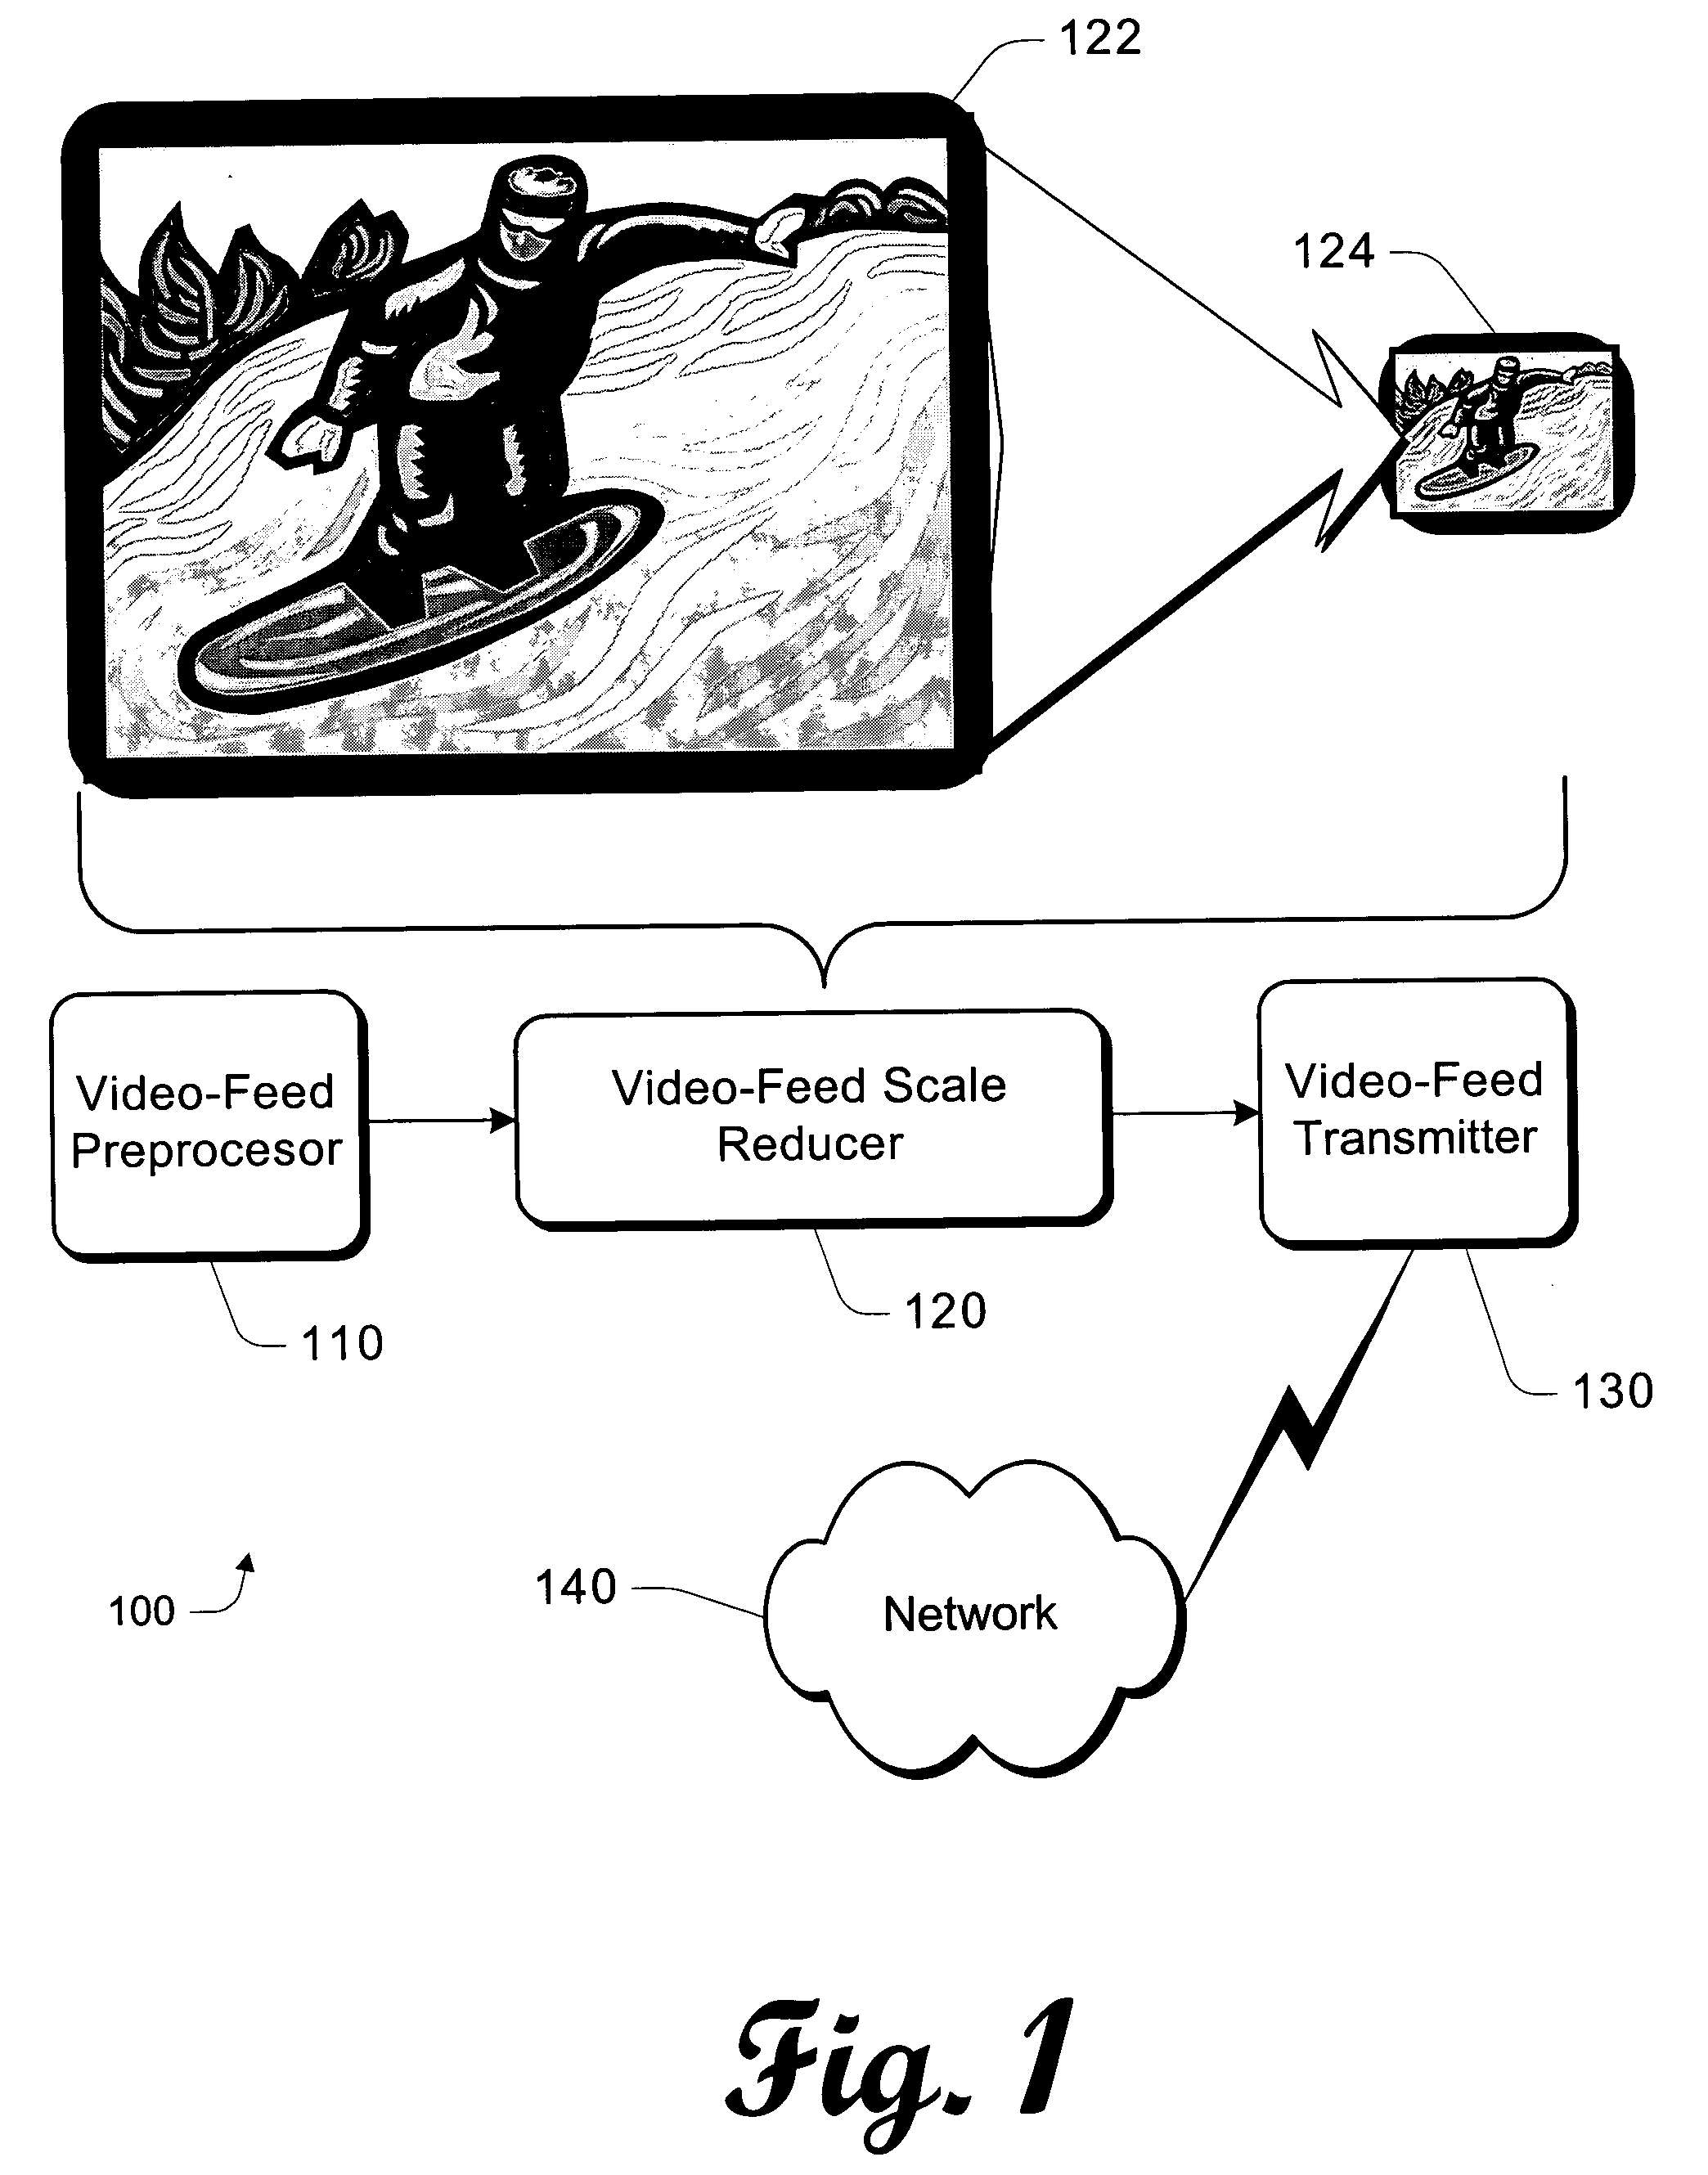 Miniaturized video feed generation and user-interface